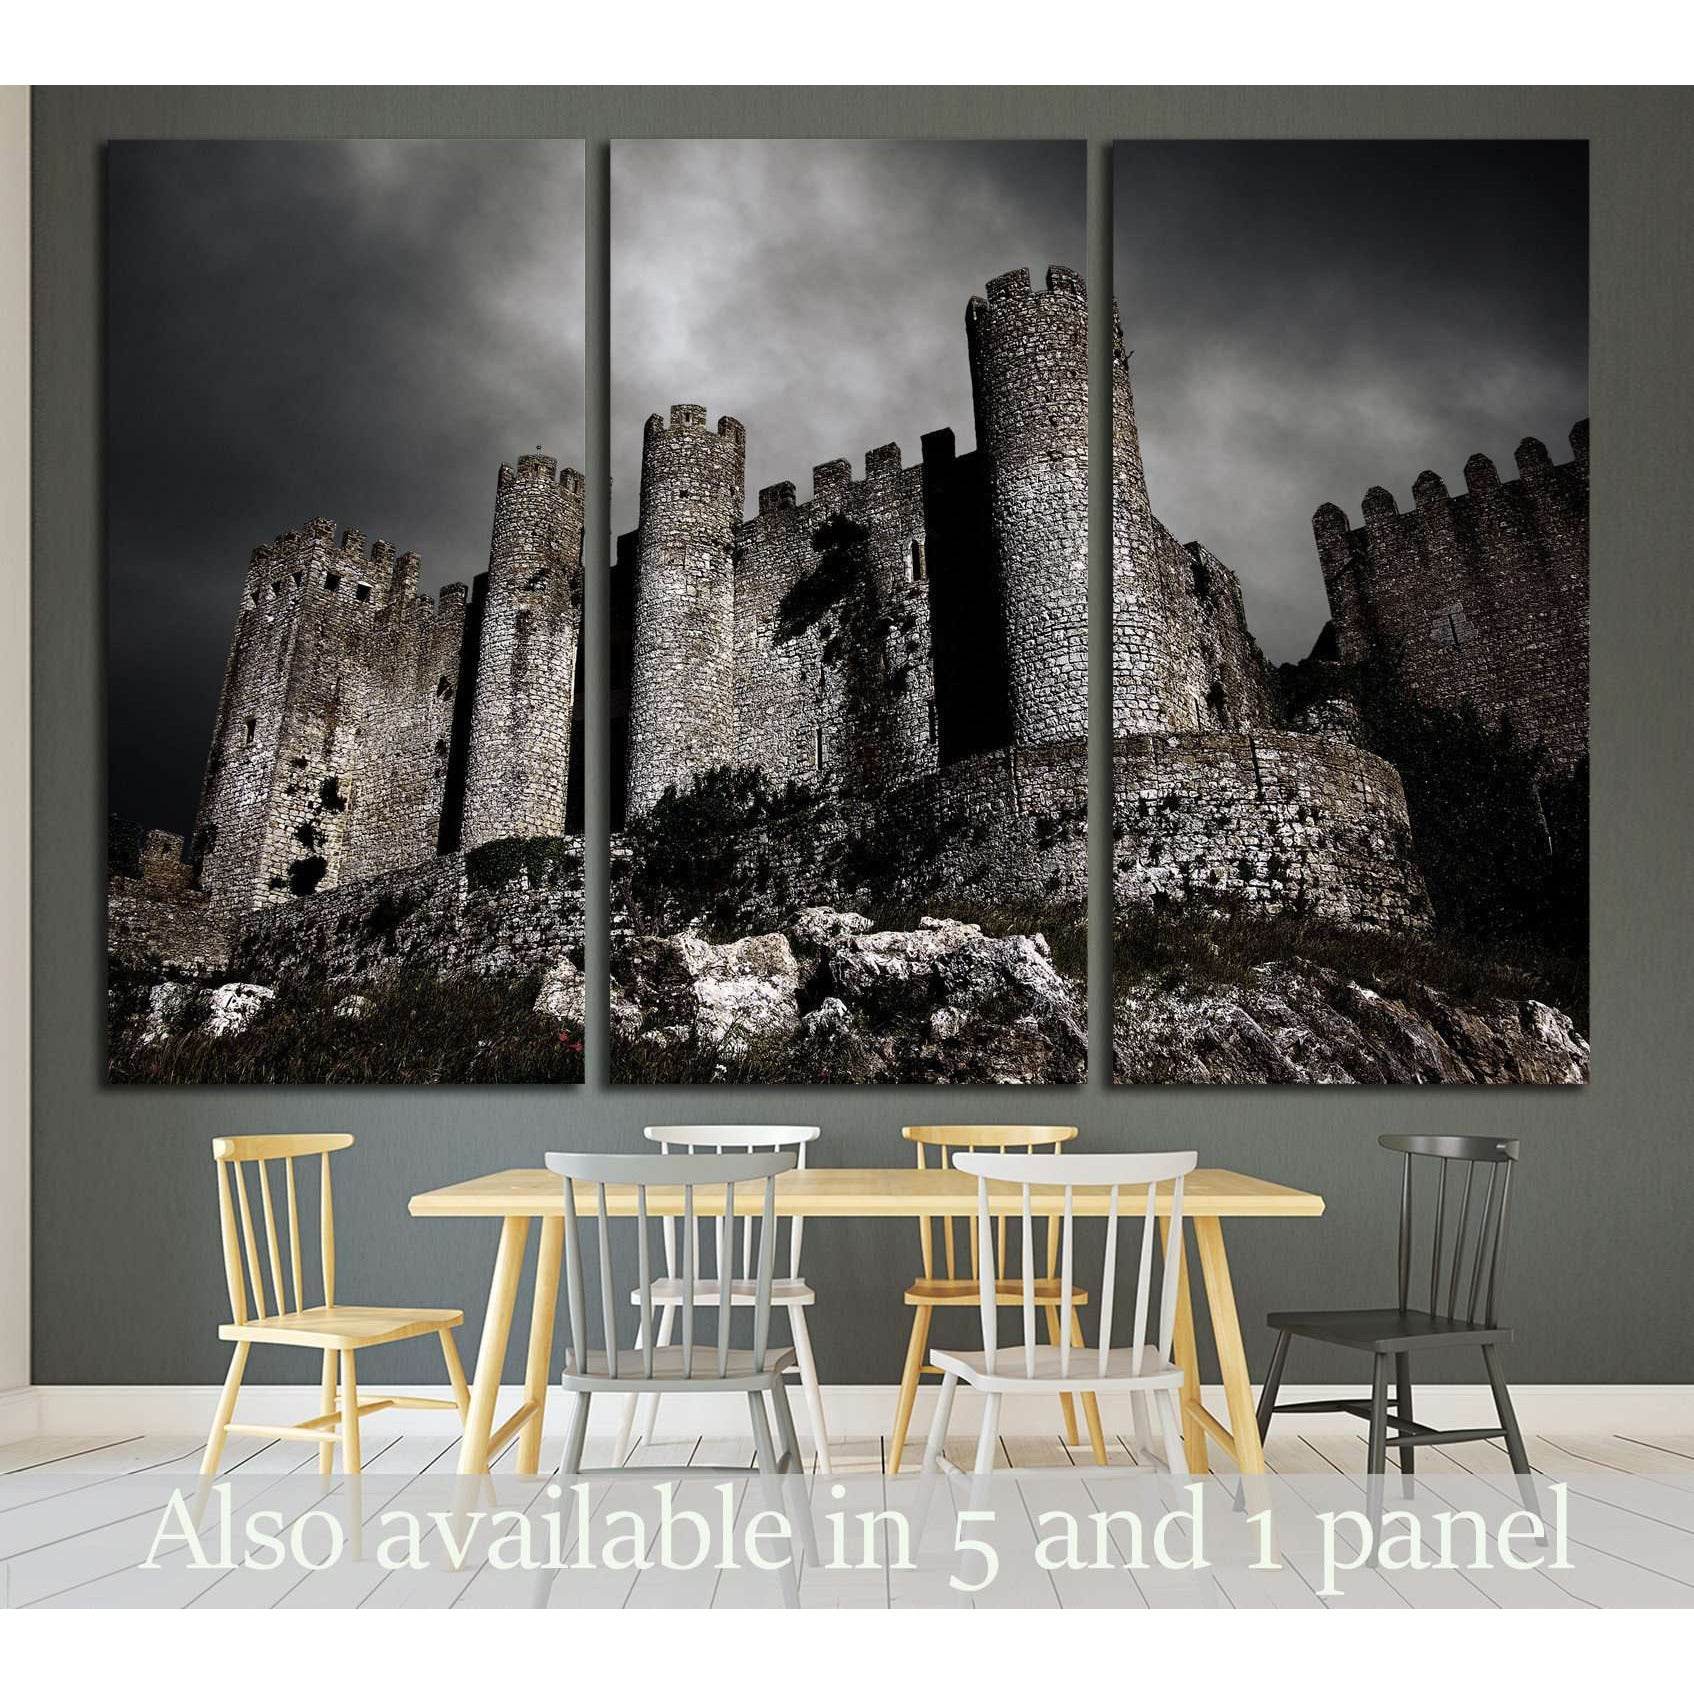 Medieval Castle Under Brooding Sky Canvas Print for Historic DecorThis canvas print portrays an imposing medieval castle set against a dramatic sky, evoking a sense of history and timeless strength. The moody atmosphere captured in this image makes it a c